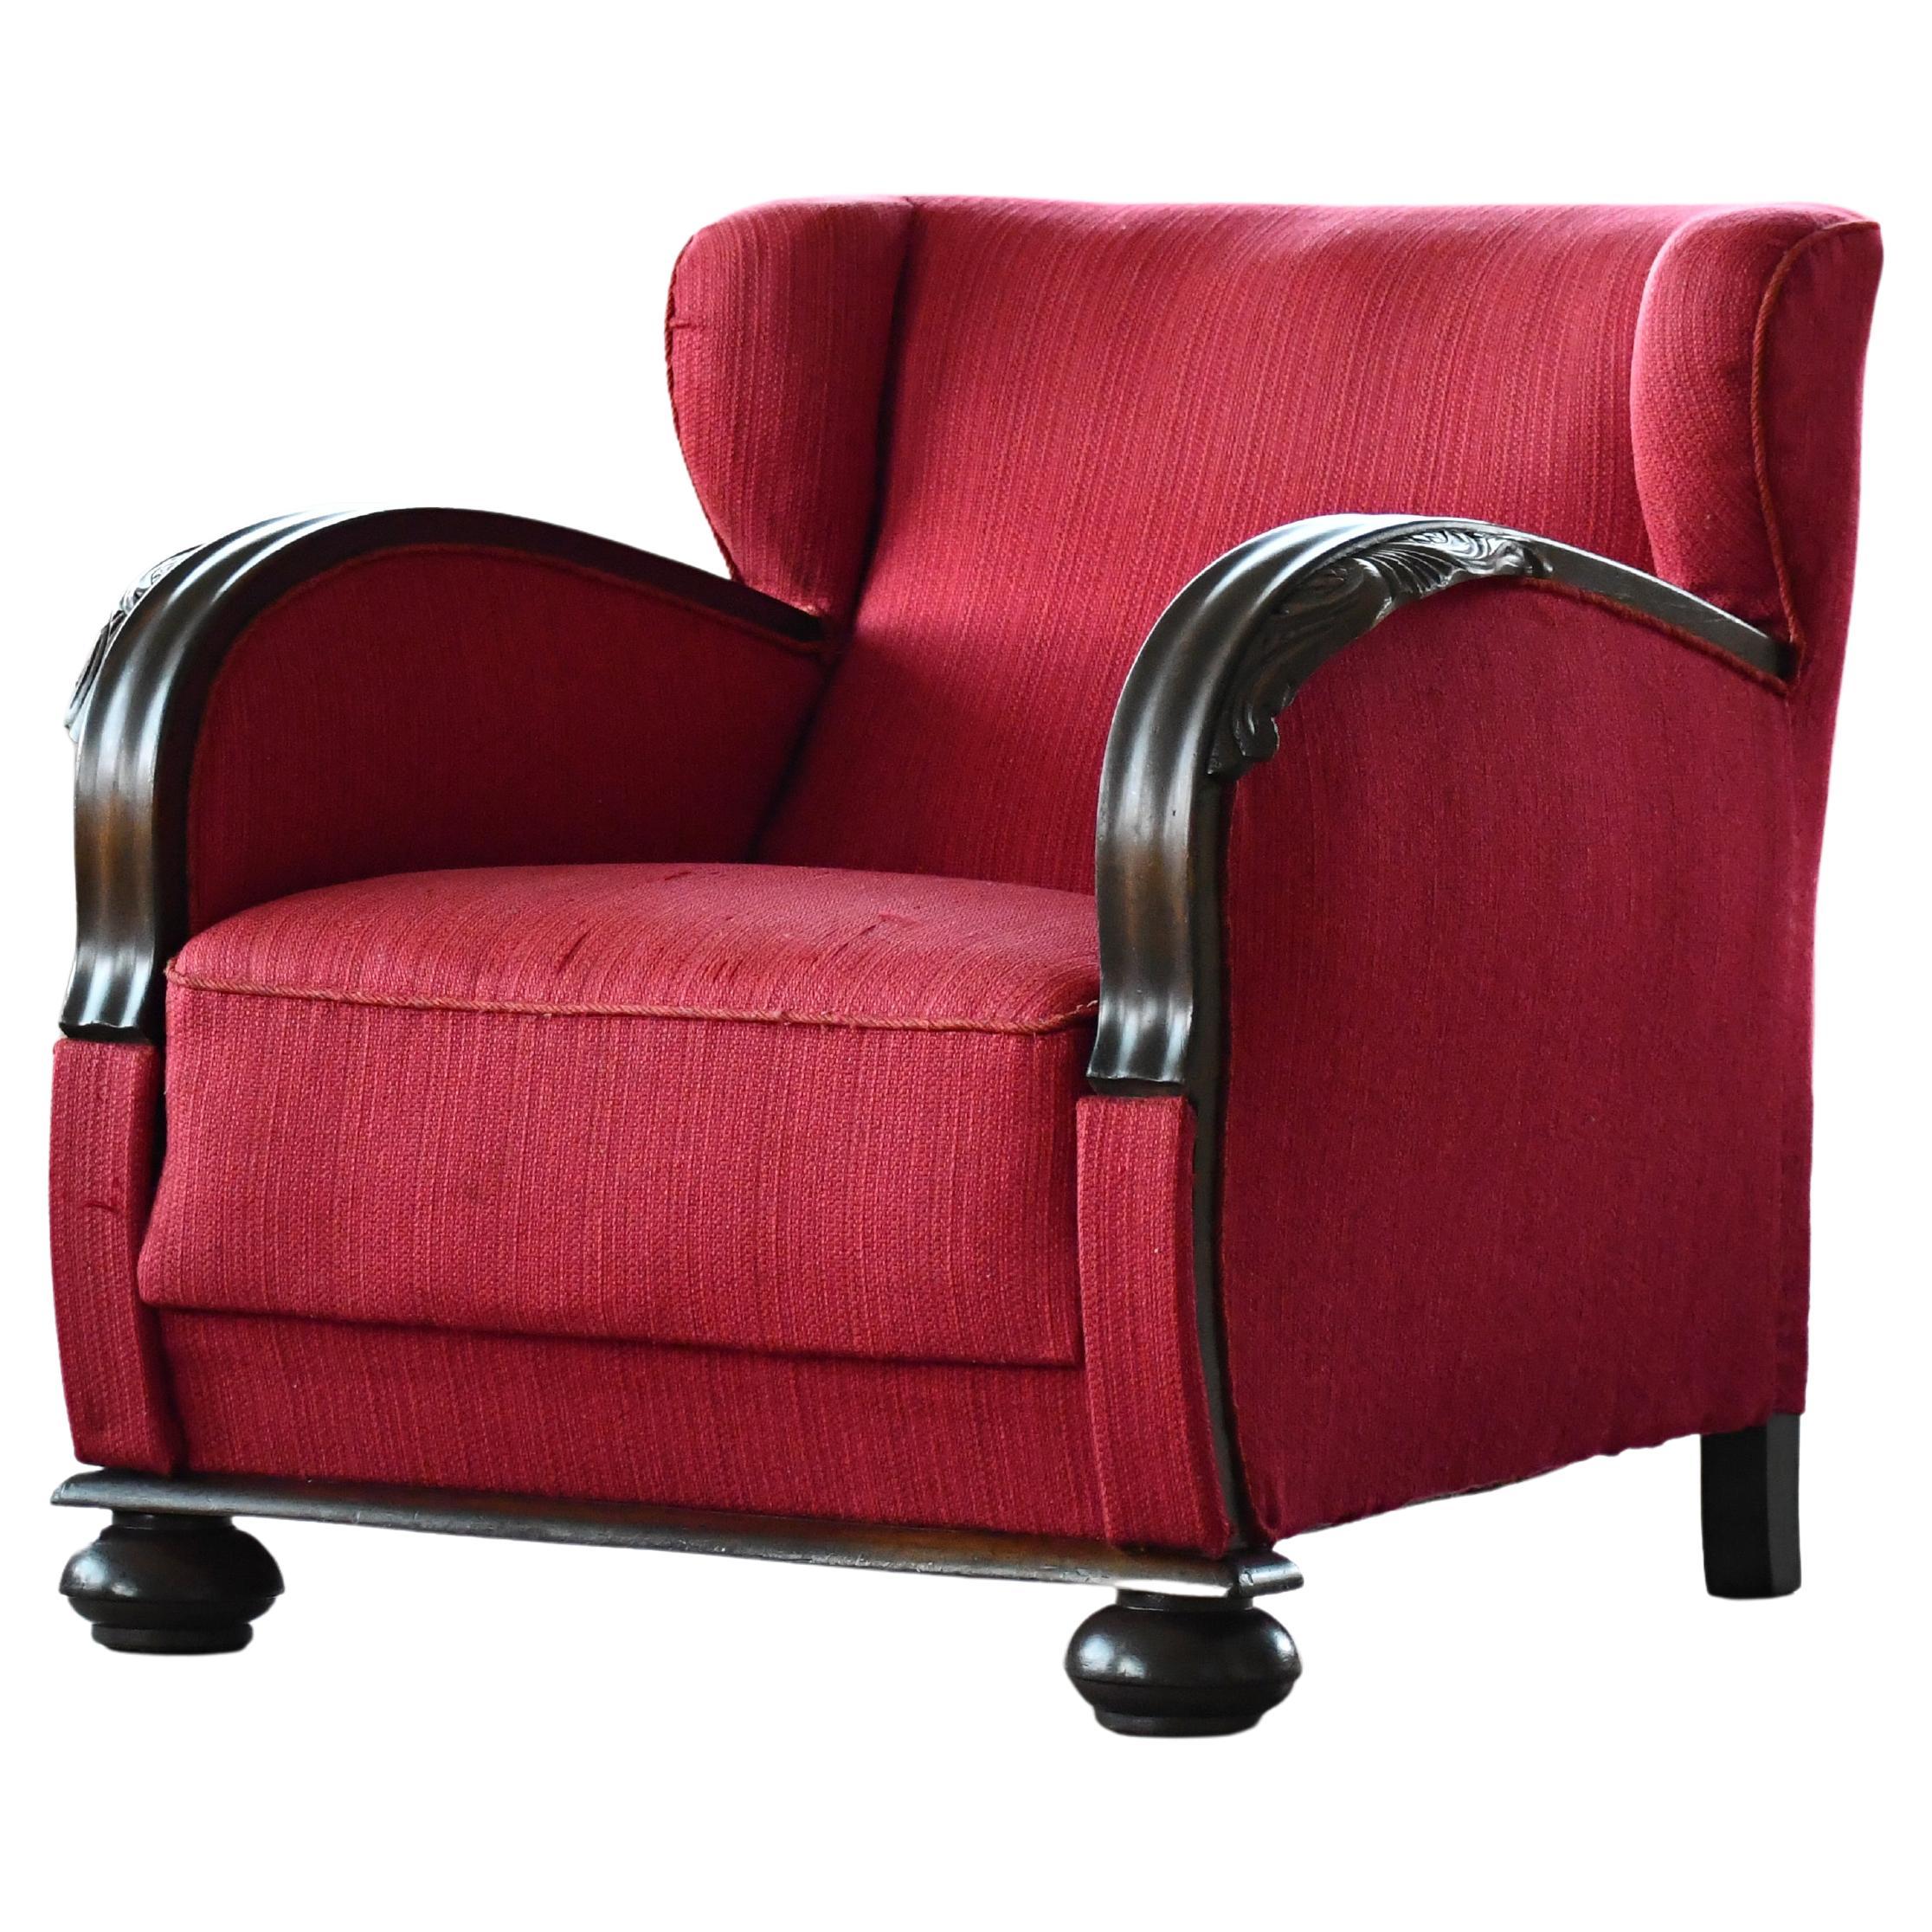 Danish 1930s Art Deco Lounge Chair in Red Mohair with Carved Armrests For Sale